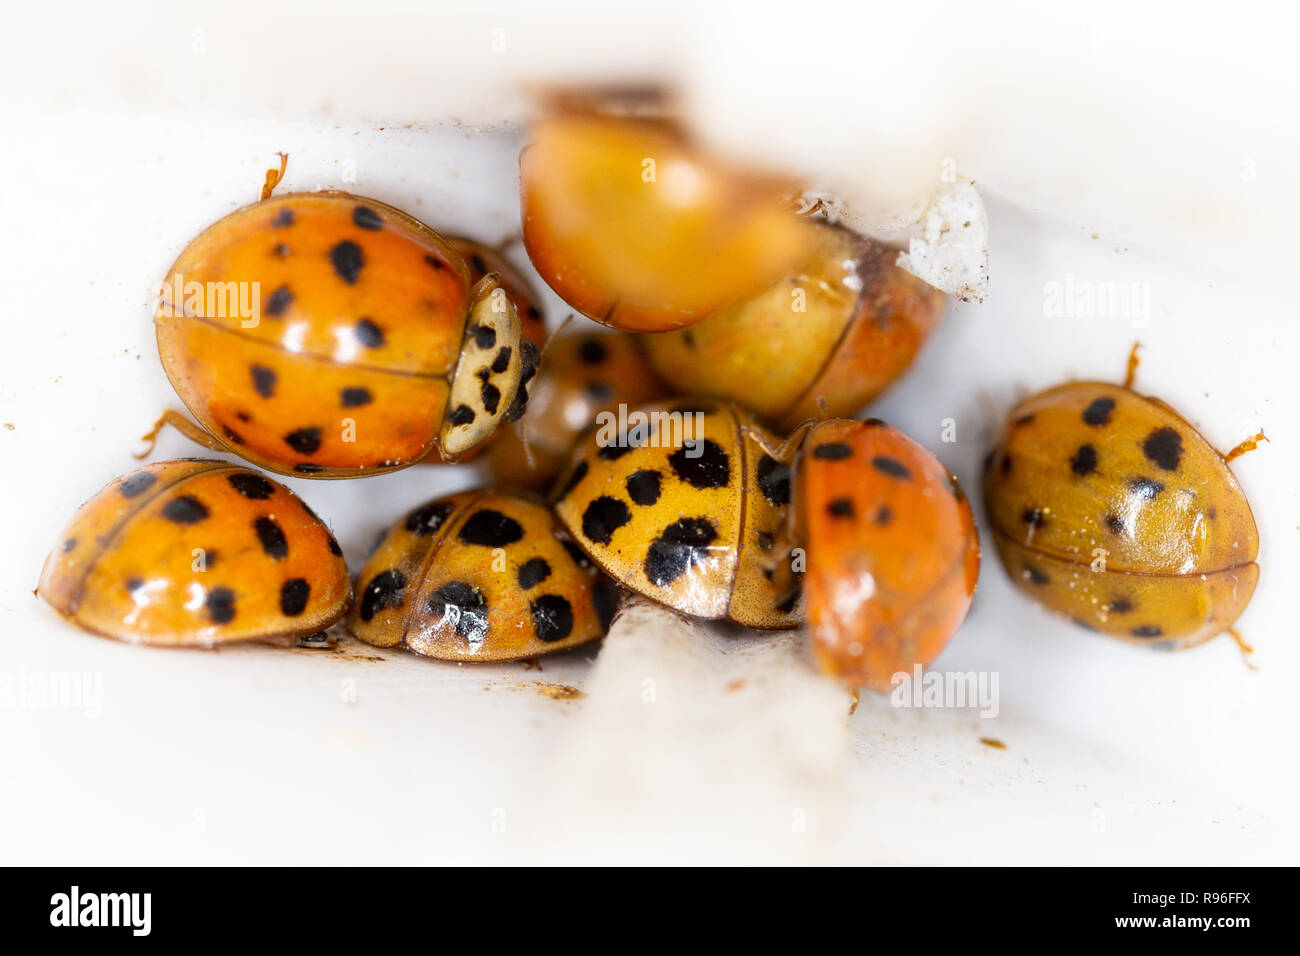 Asian ladybeetles - Harmonia axyridis - seeking for shelter in the gaps of a window before winter Stock Photo